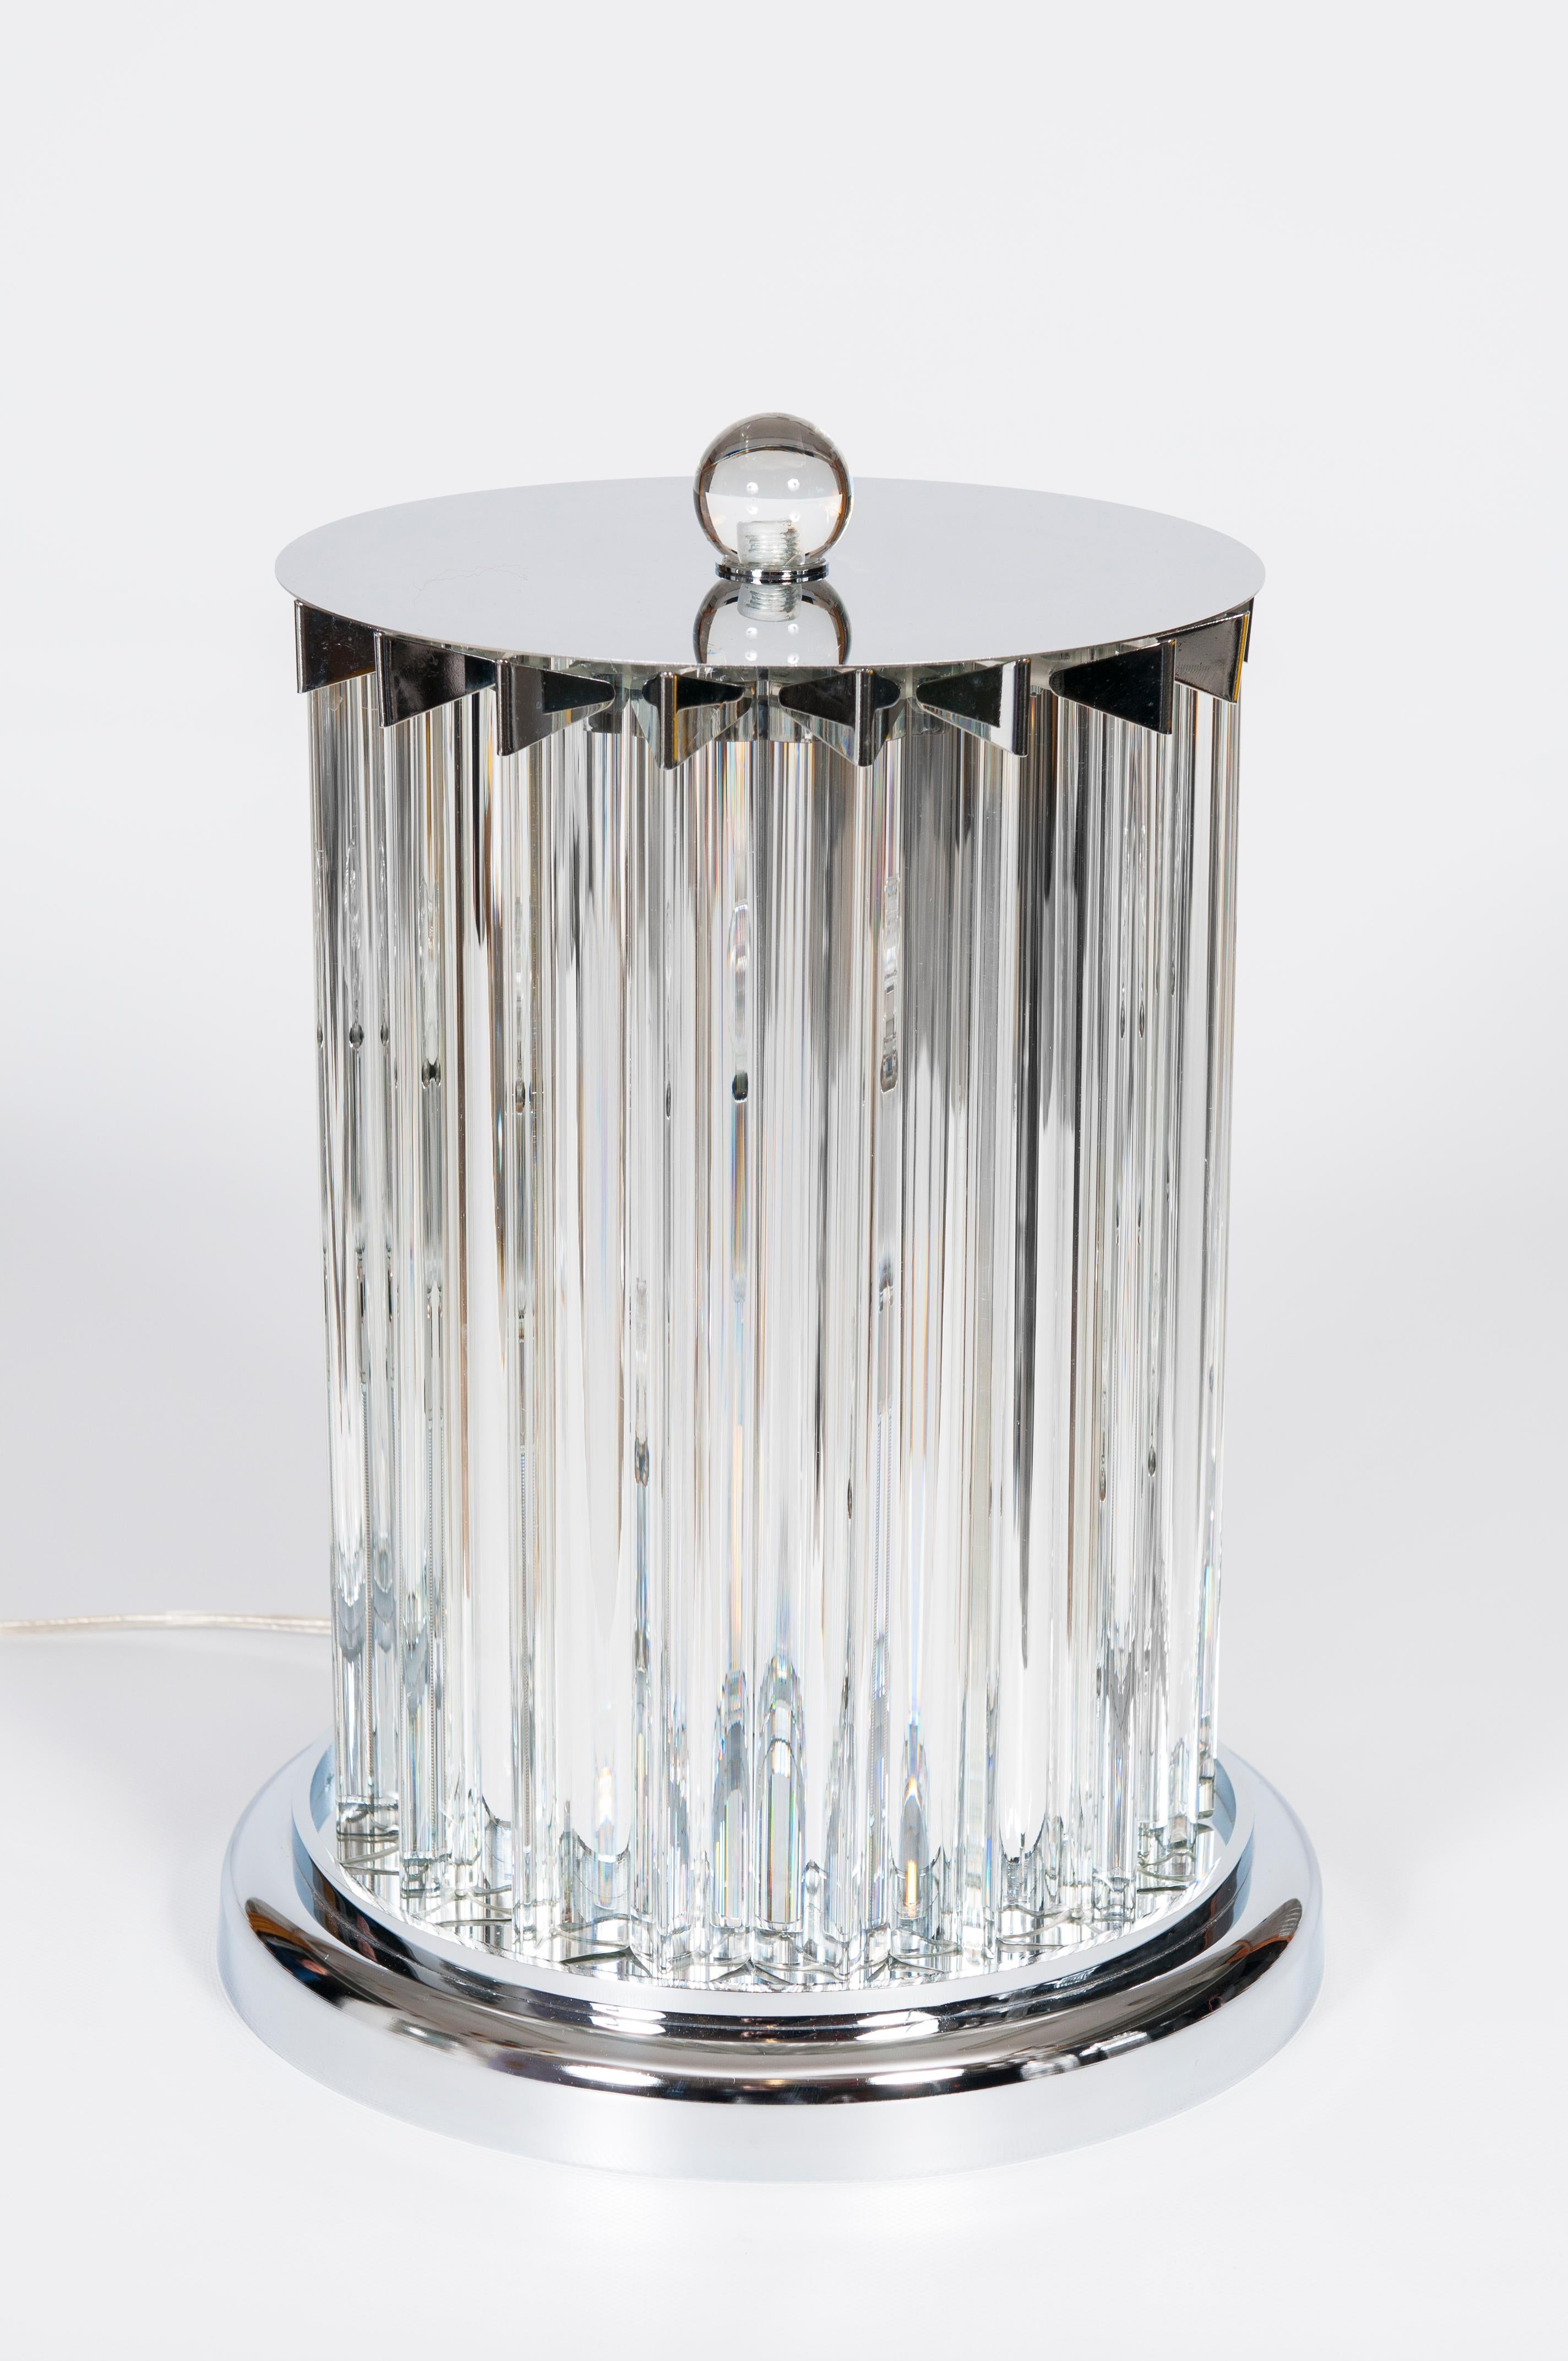 Contemporary table lamp in Murano Glass Transparent Color, Giovanni Dalla Fina, 21st century.
The table lamp is composed of clear glass elements with a triangular base that reflect light from the 2 central light bulbs. All elements, entirely